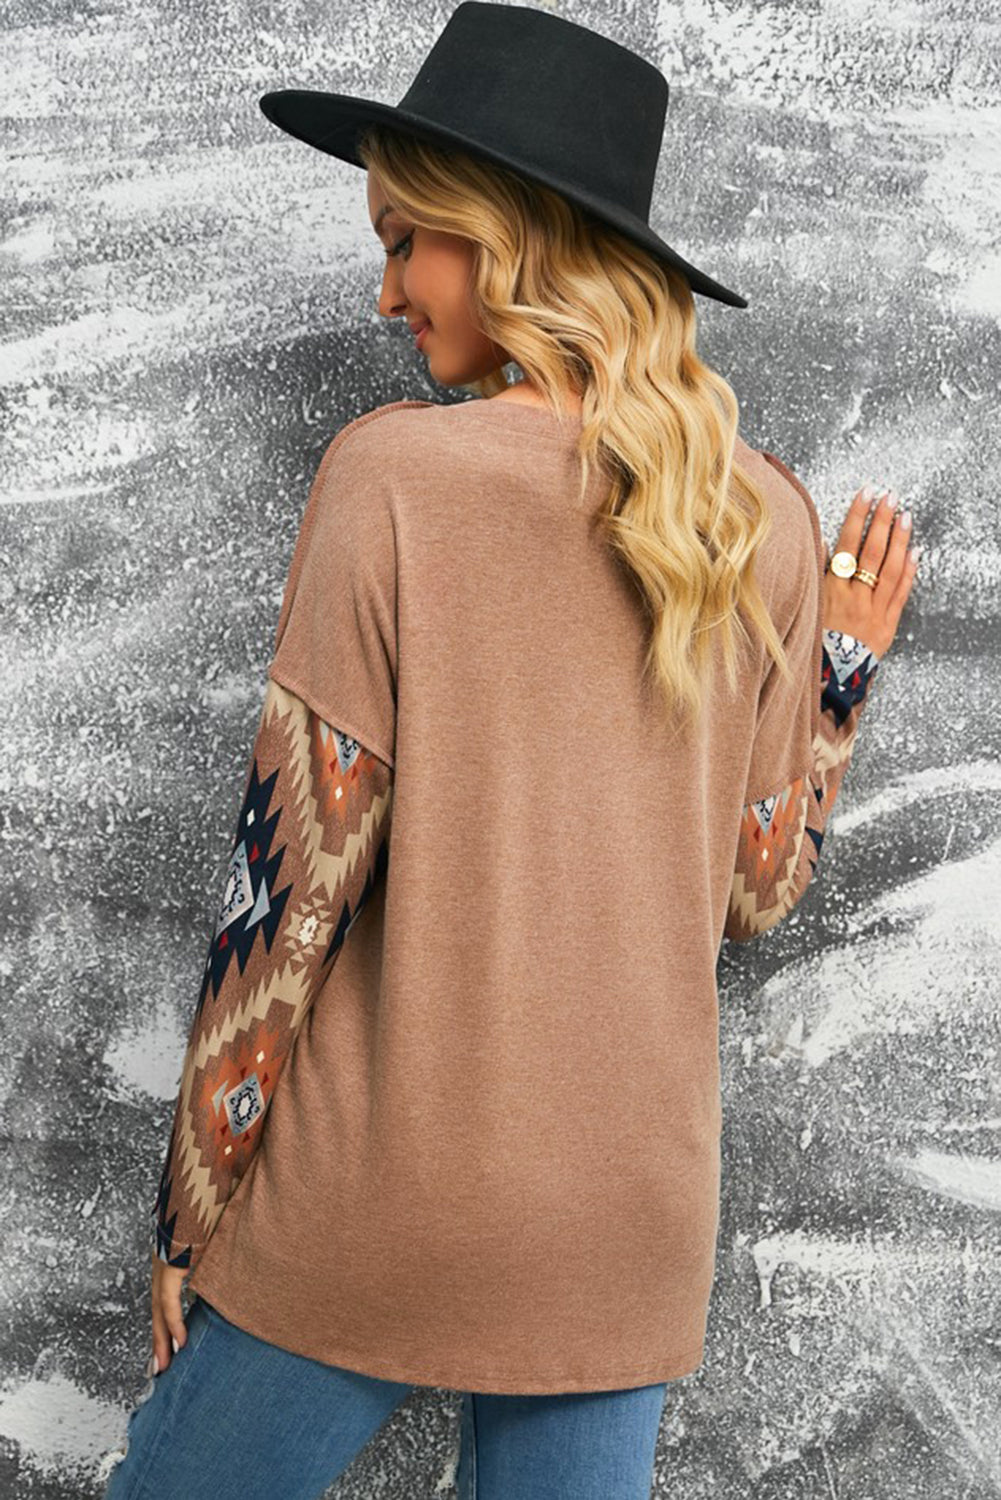 Add a Western Touch with the Brown Western Print Buttoned V Neck T